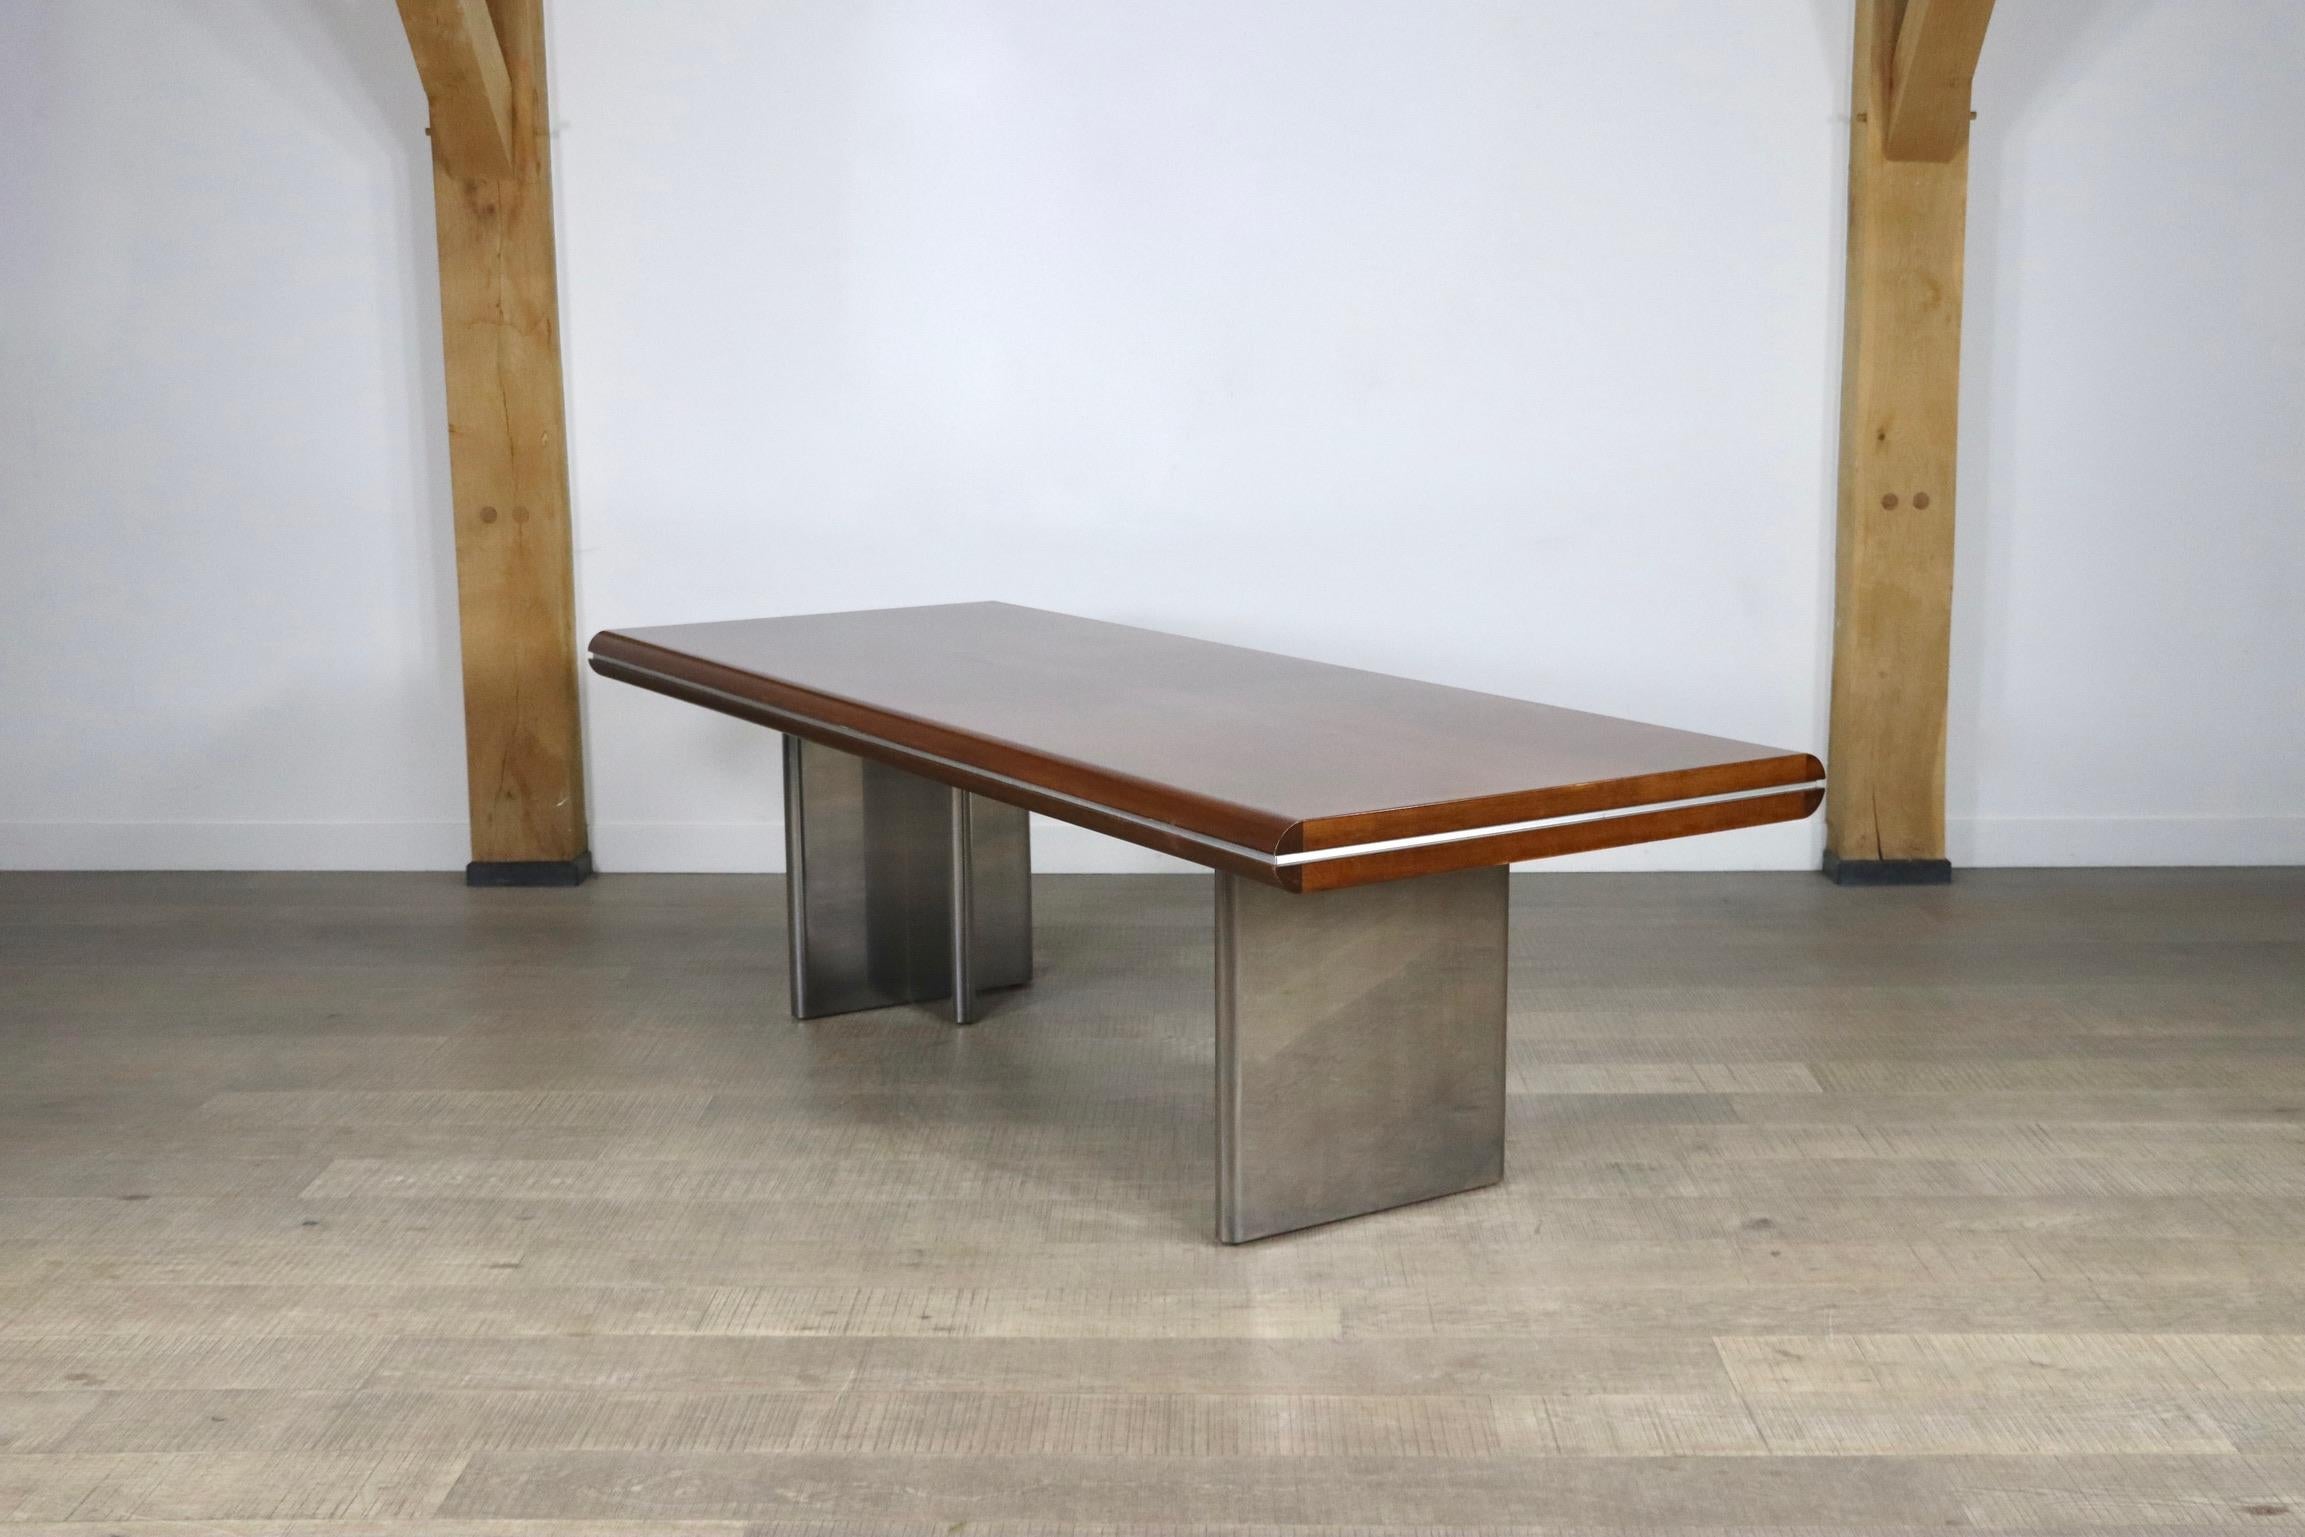 Impressive directors desk designed by Hans von Klier. A striking combination of differently textured materials makes this desk an intriguing piece. This particular model is the largest version of this model, which emphasizes the design even more.